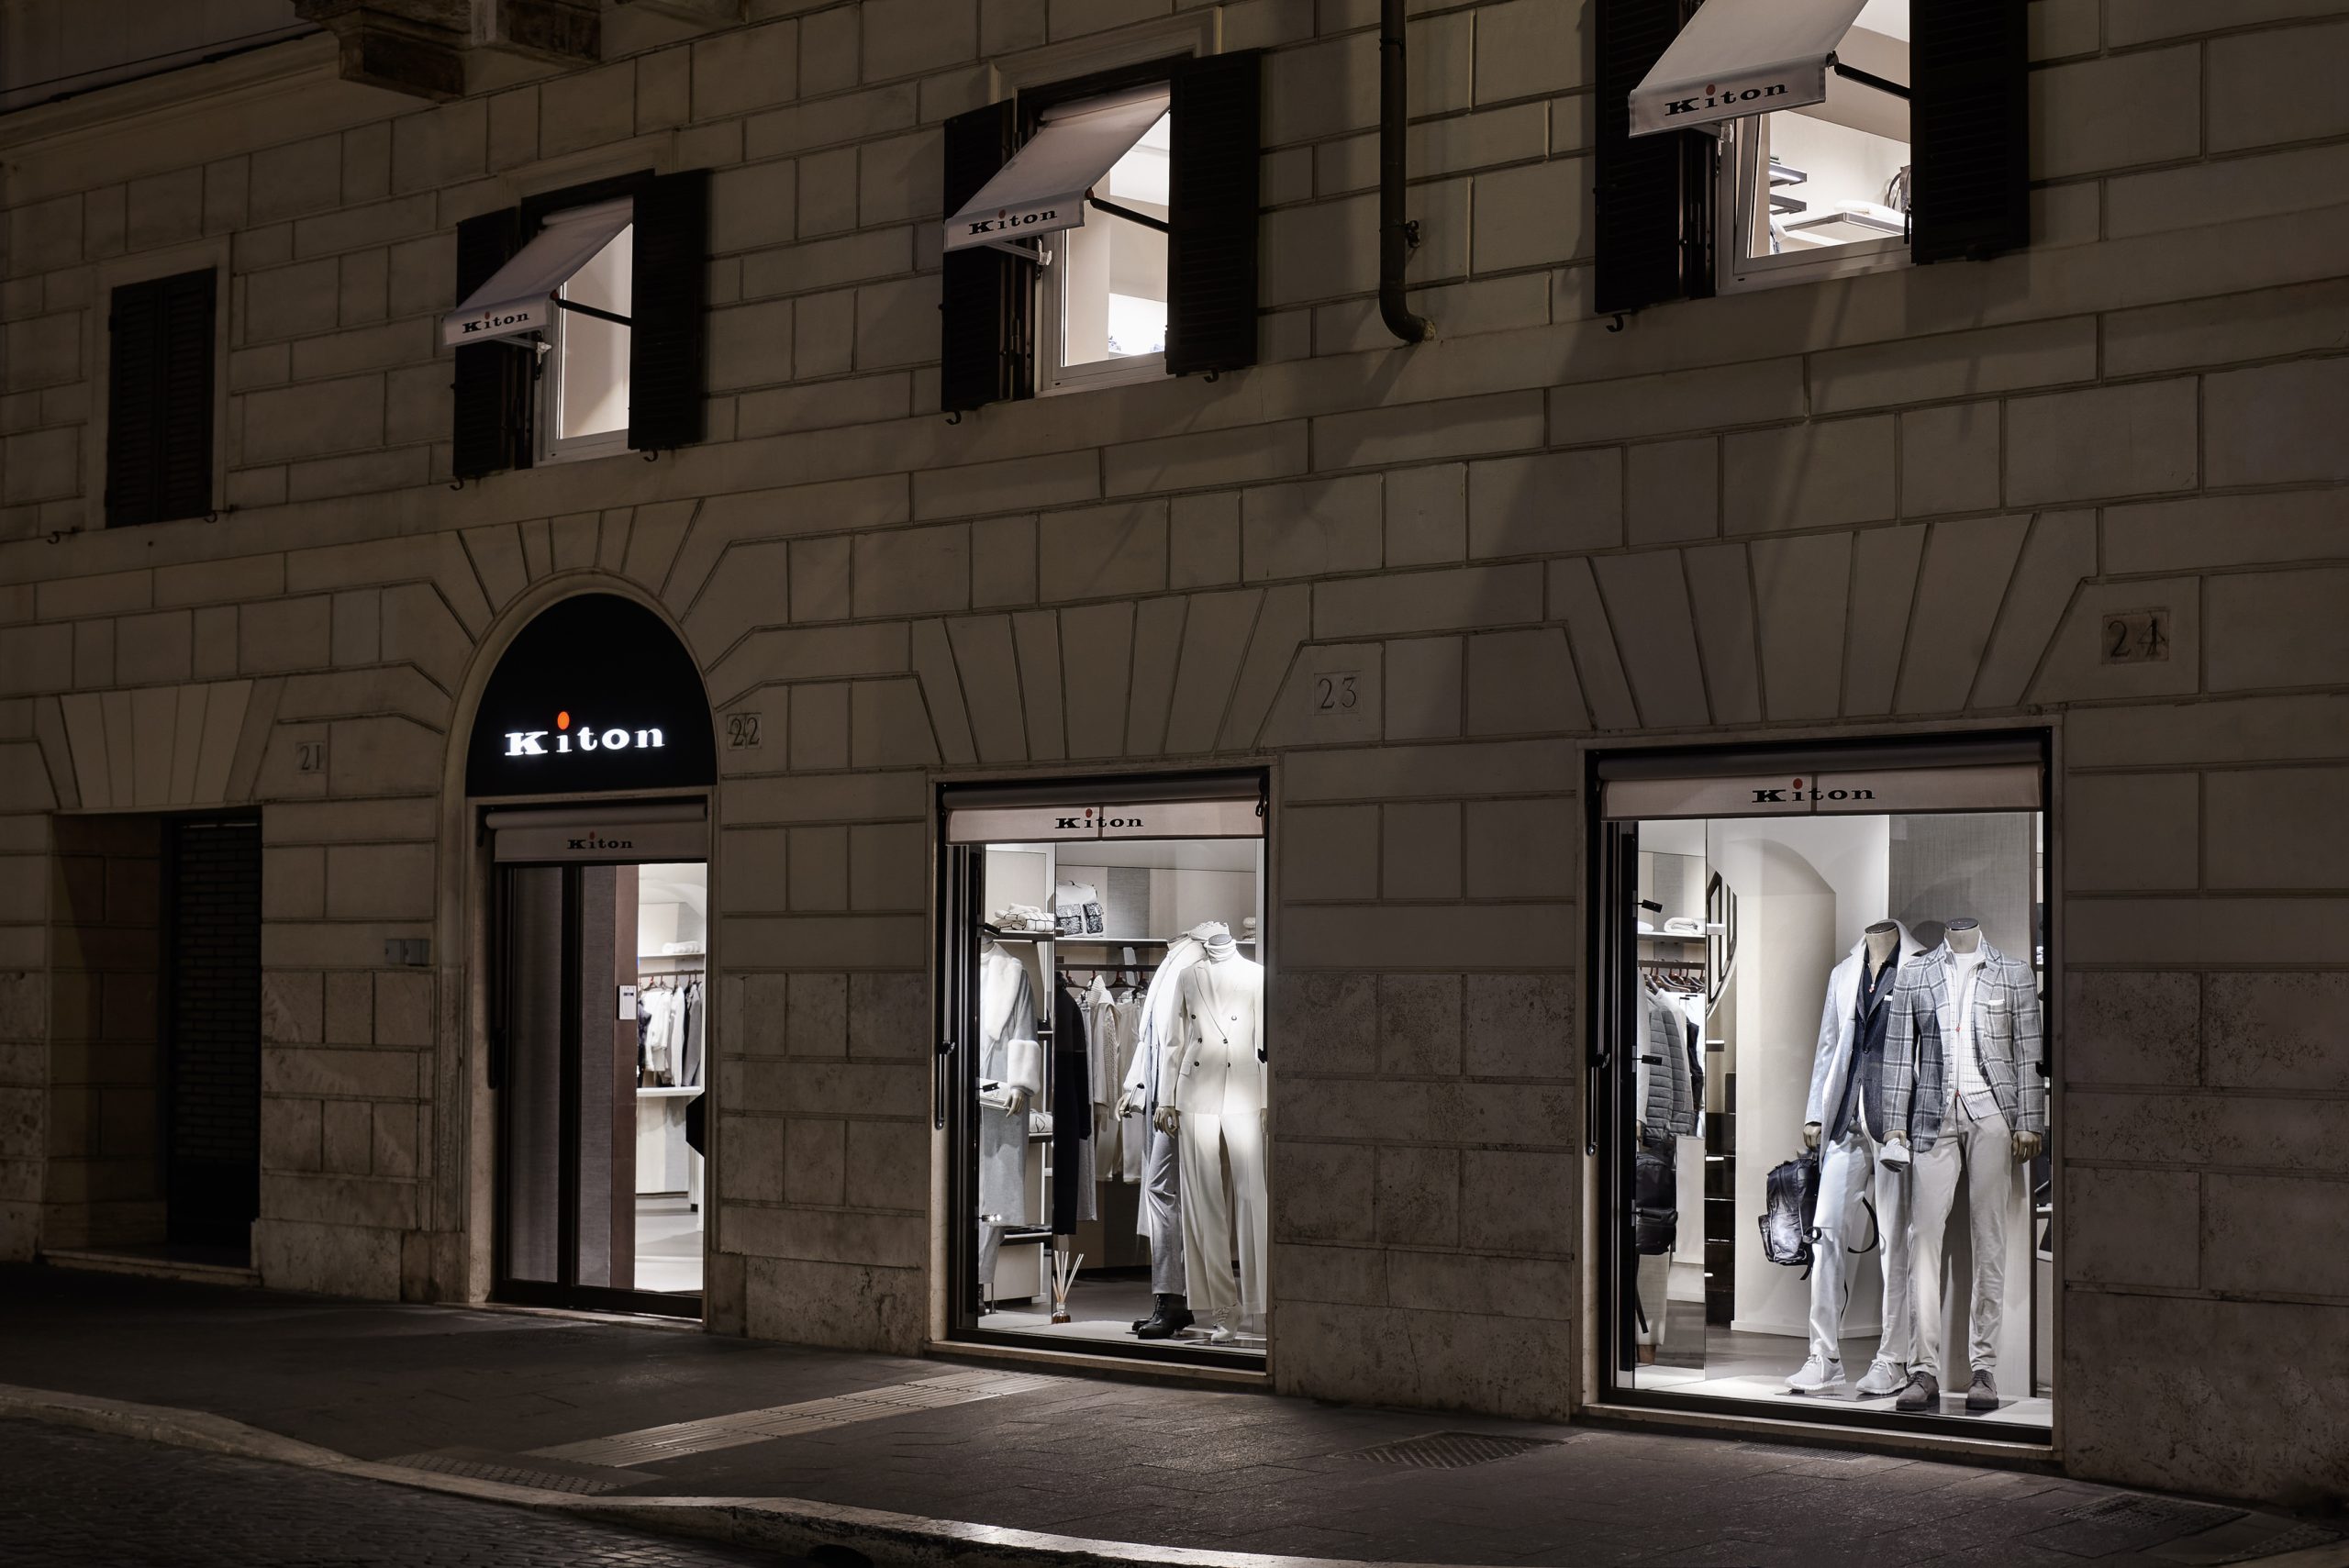 Kiton flagship Store by night in Roma